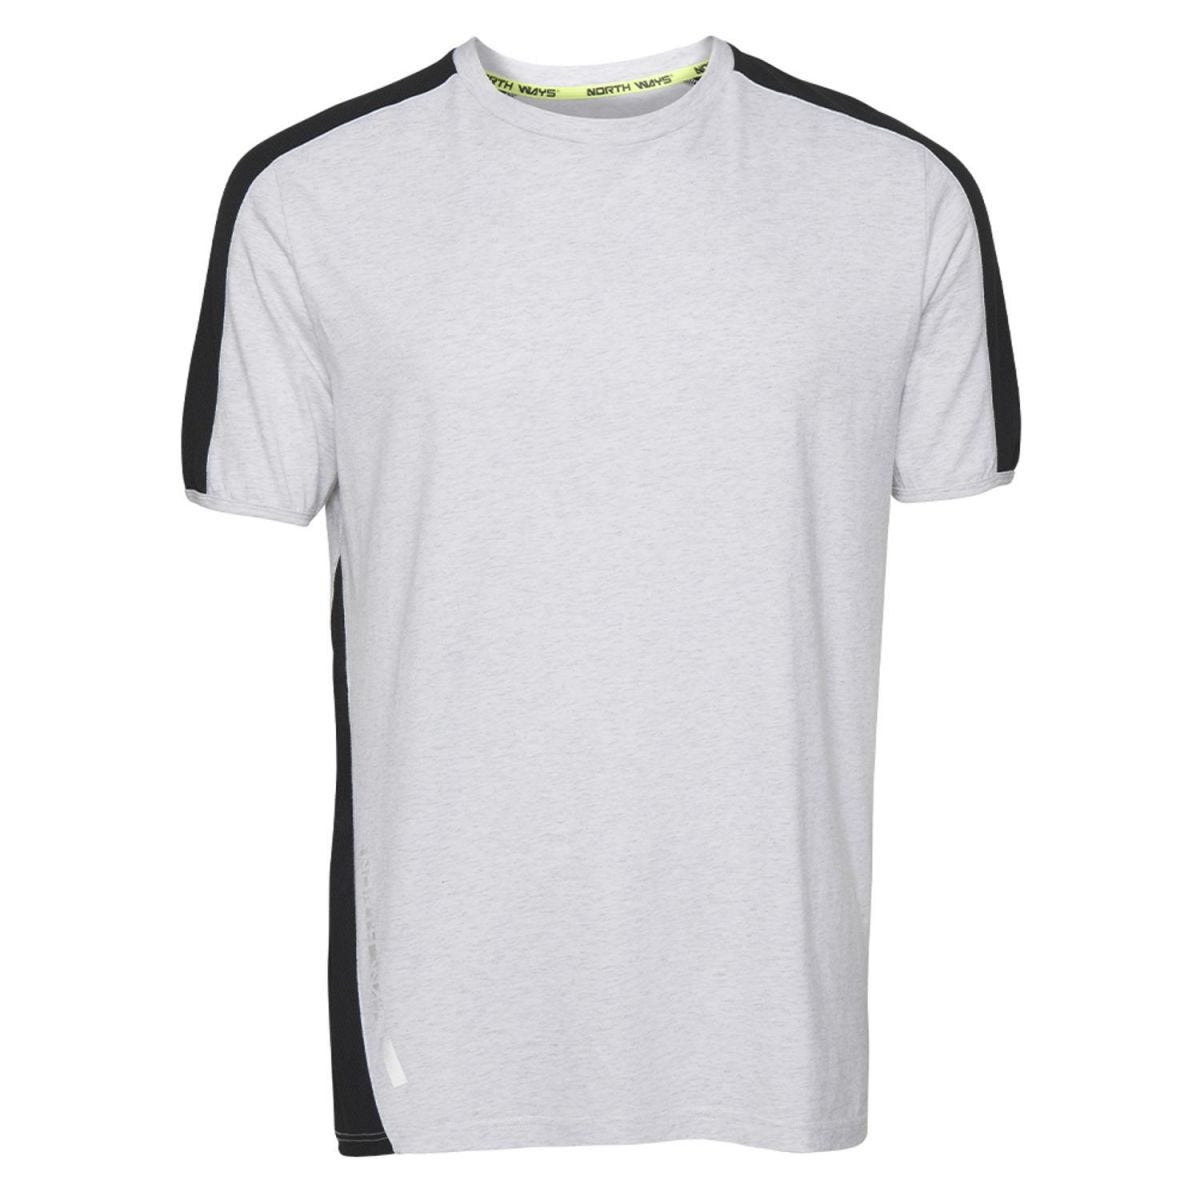 T-shirt Blanc Homme (Taille M)